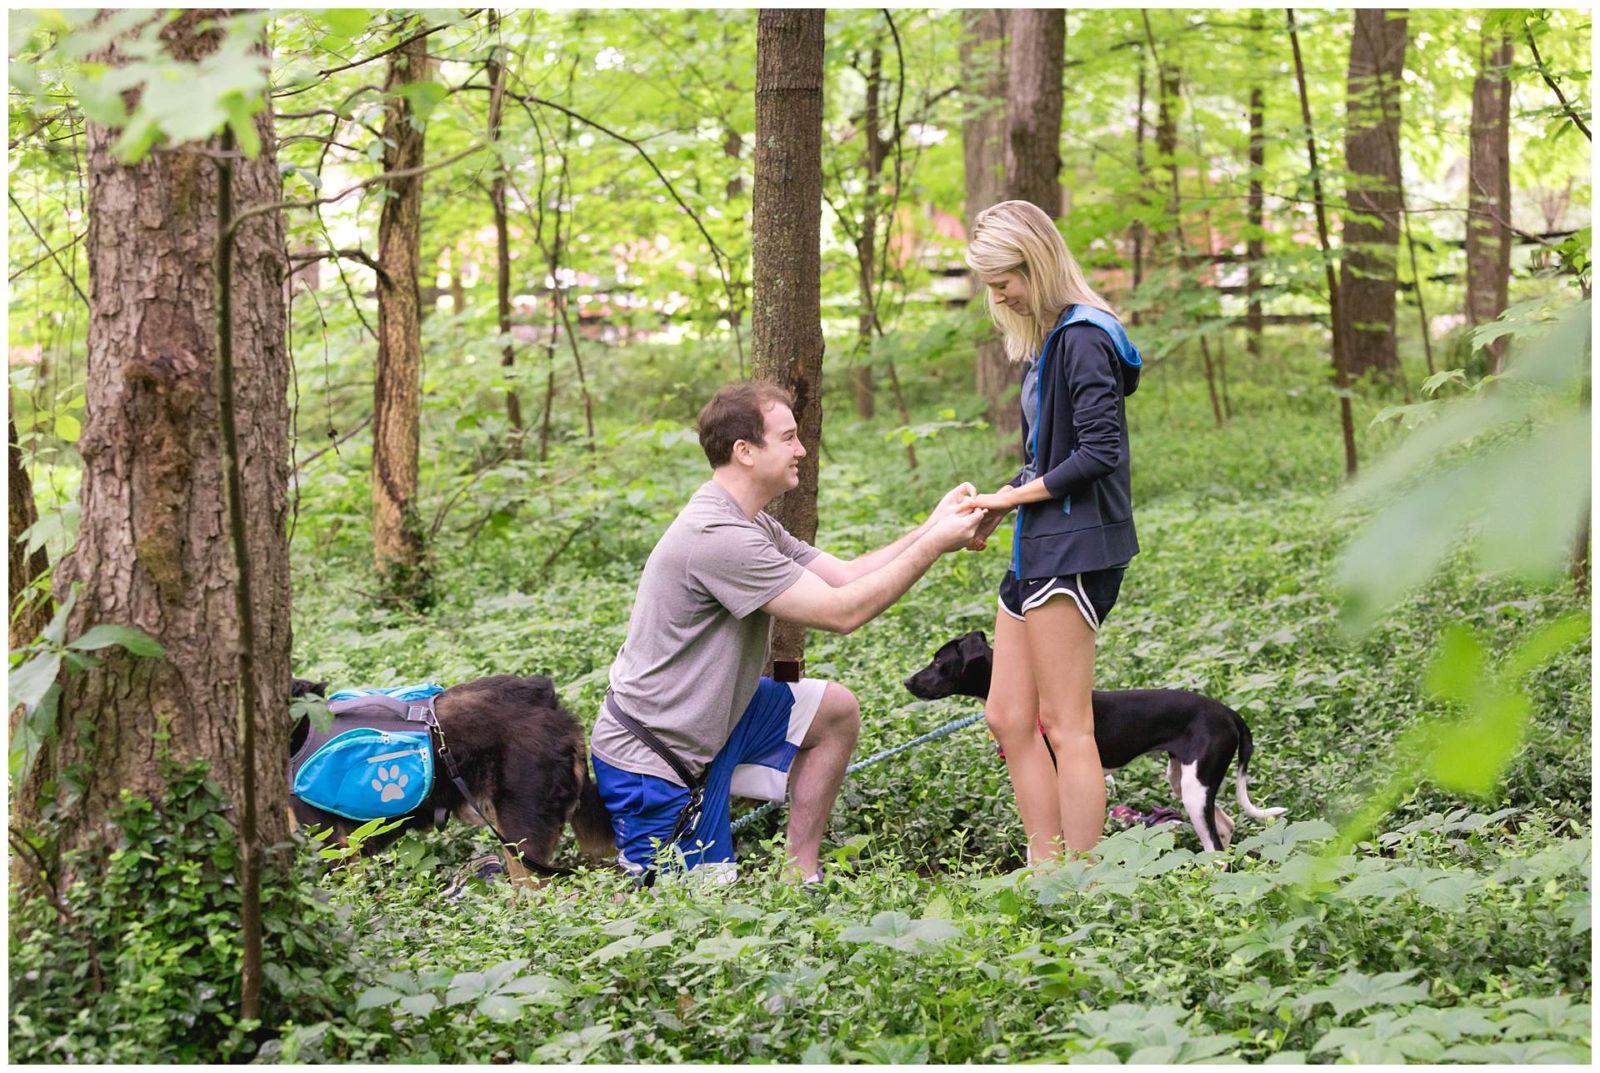 Surprise engagement proposal in the forest at the Arboretum in Lexington, KY